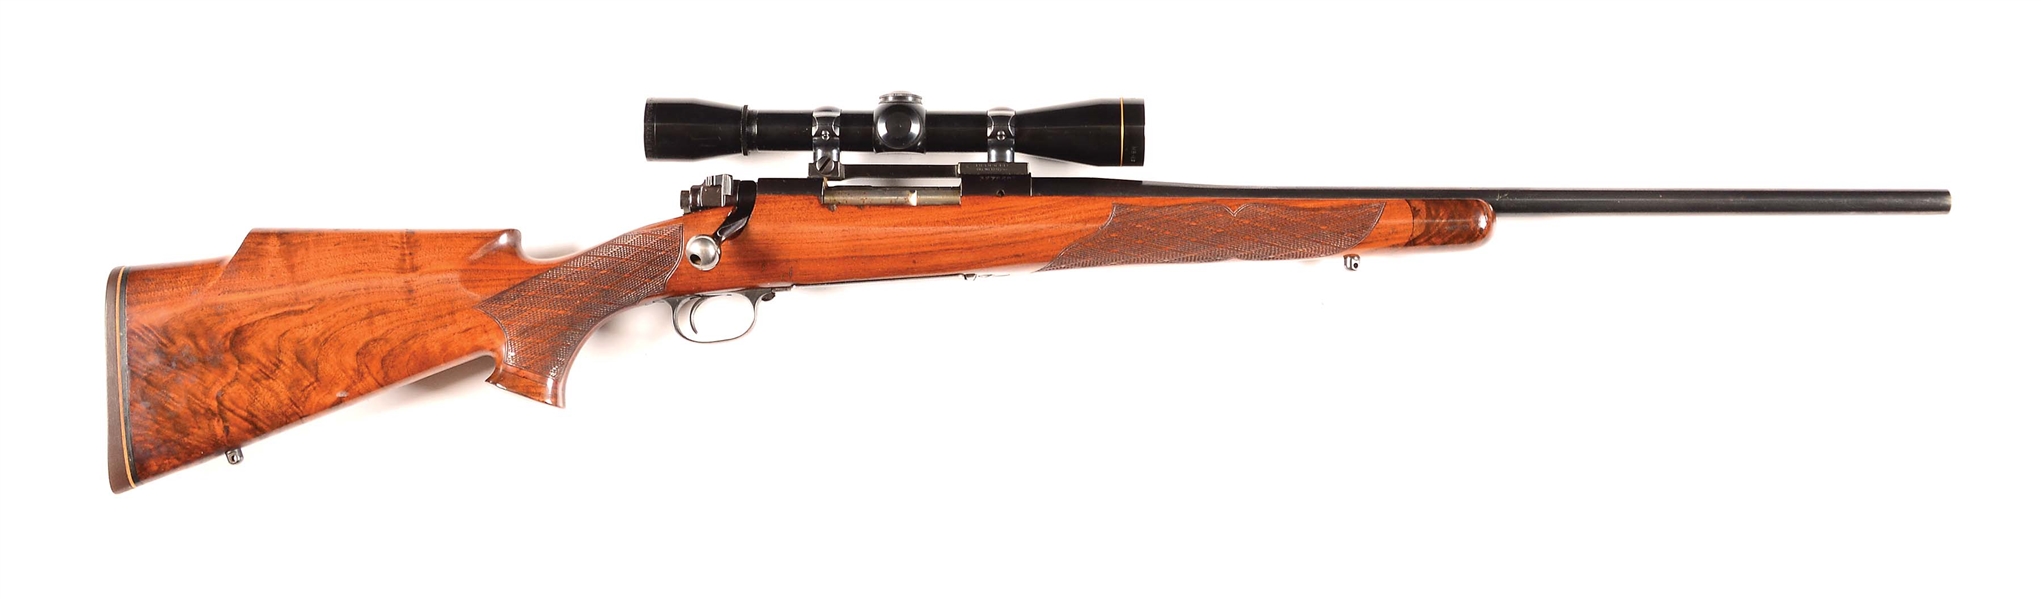 (C) CUSTOM WINCHESTER MODEL 70 WITH PROVENANCE TO WILLIAM K DUPONT.